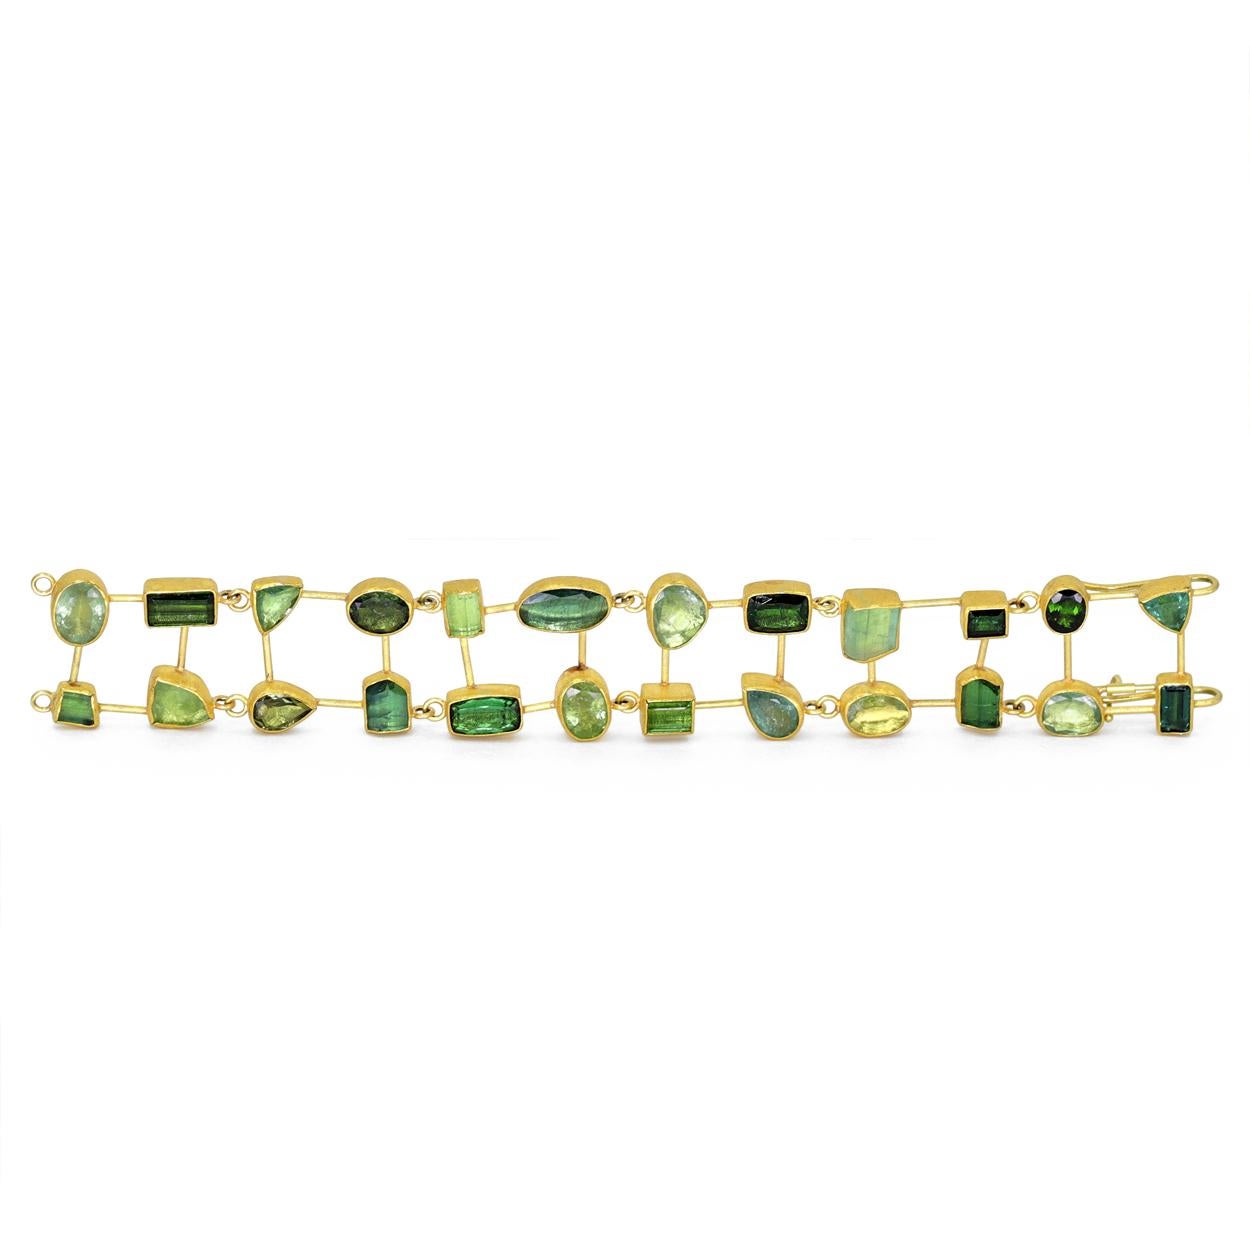 One of a kind masterpiece for the wrist by acclaimed jewelry maker Petra Class, completely handmade in signature-finished 22k yellow gold and featuring 54.0 total carats of tourmaline ranging from deep greens to soft blues in assorted faceted and